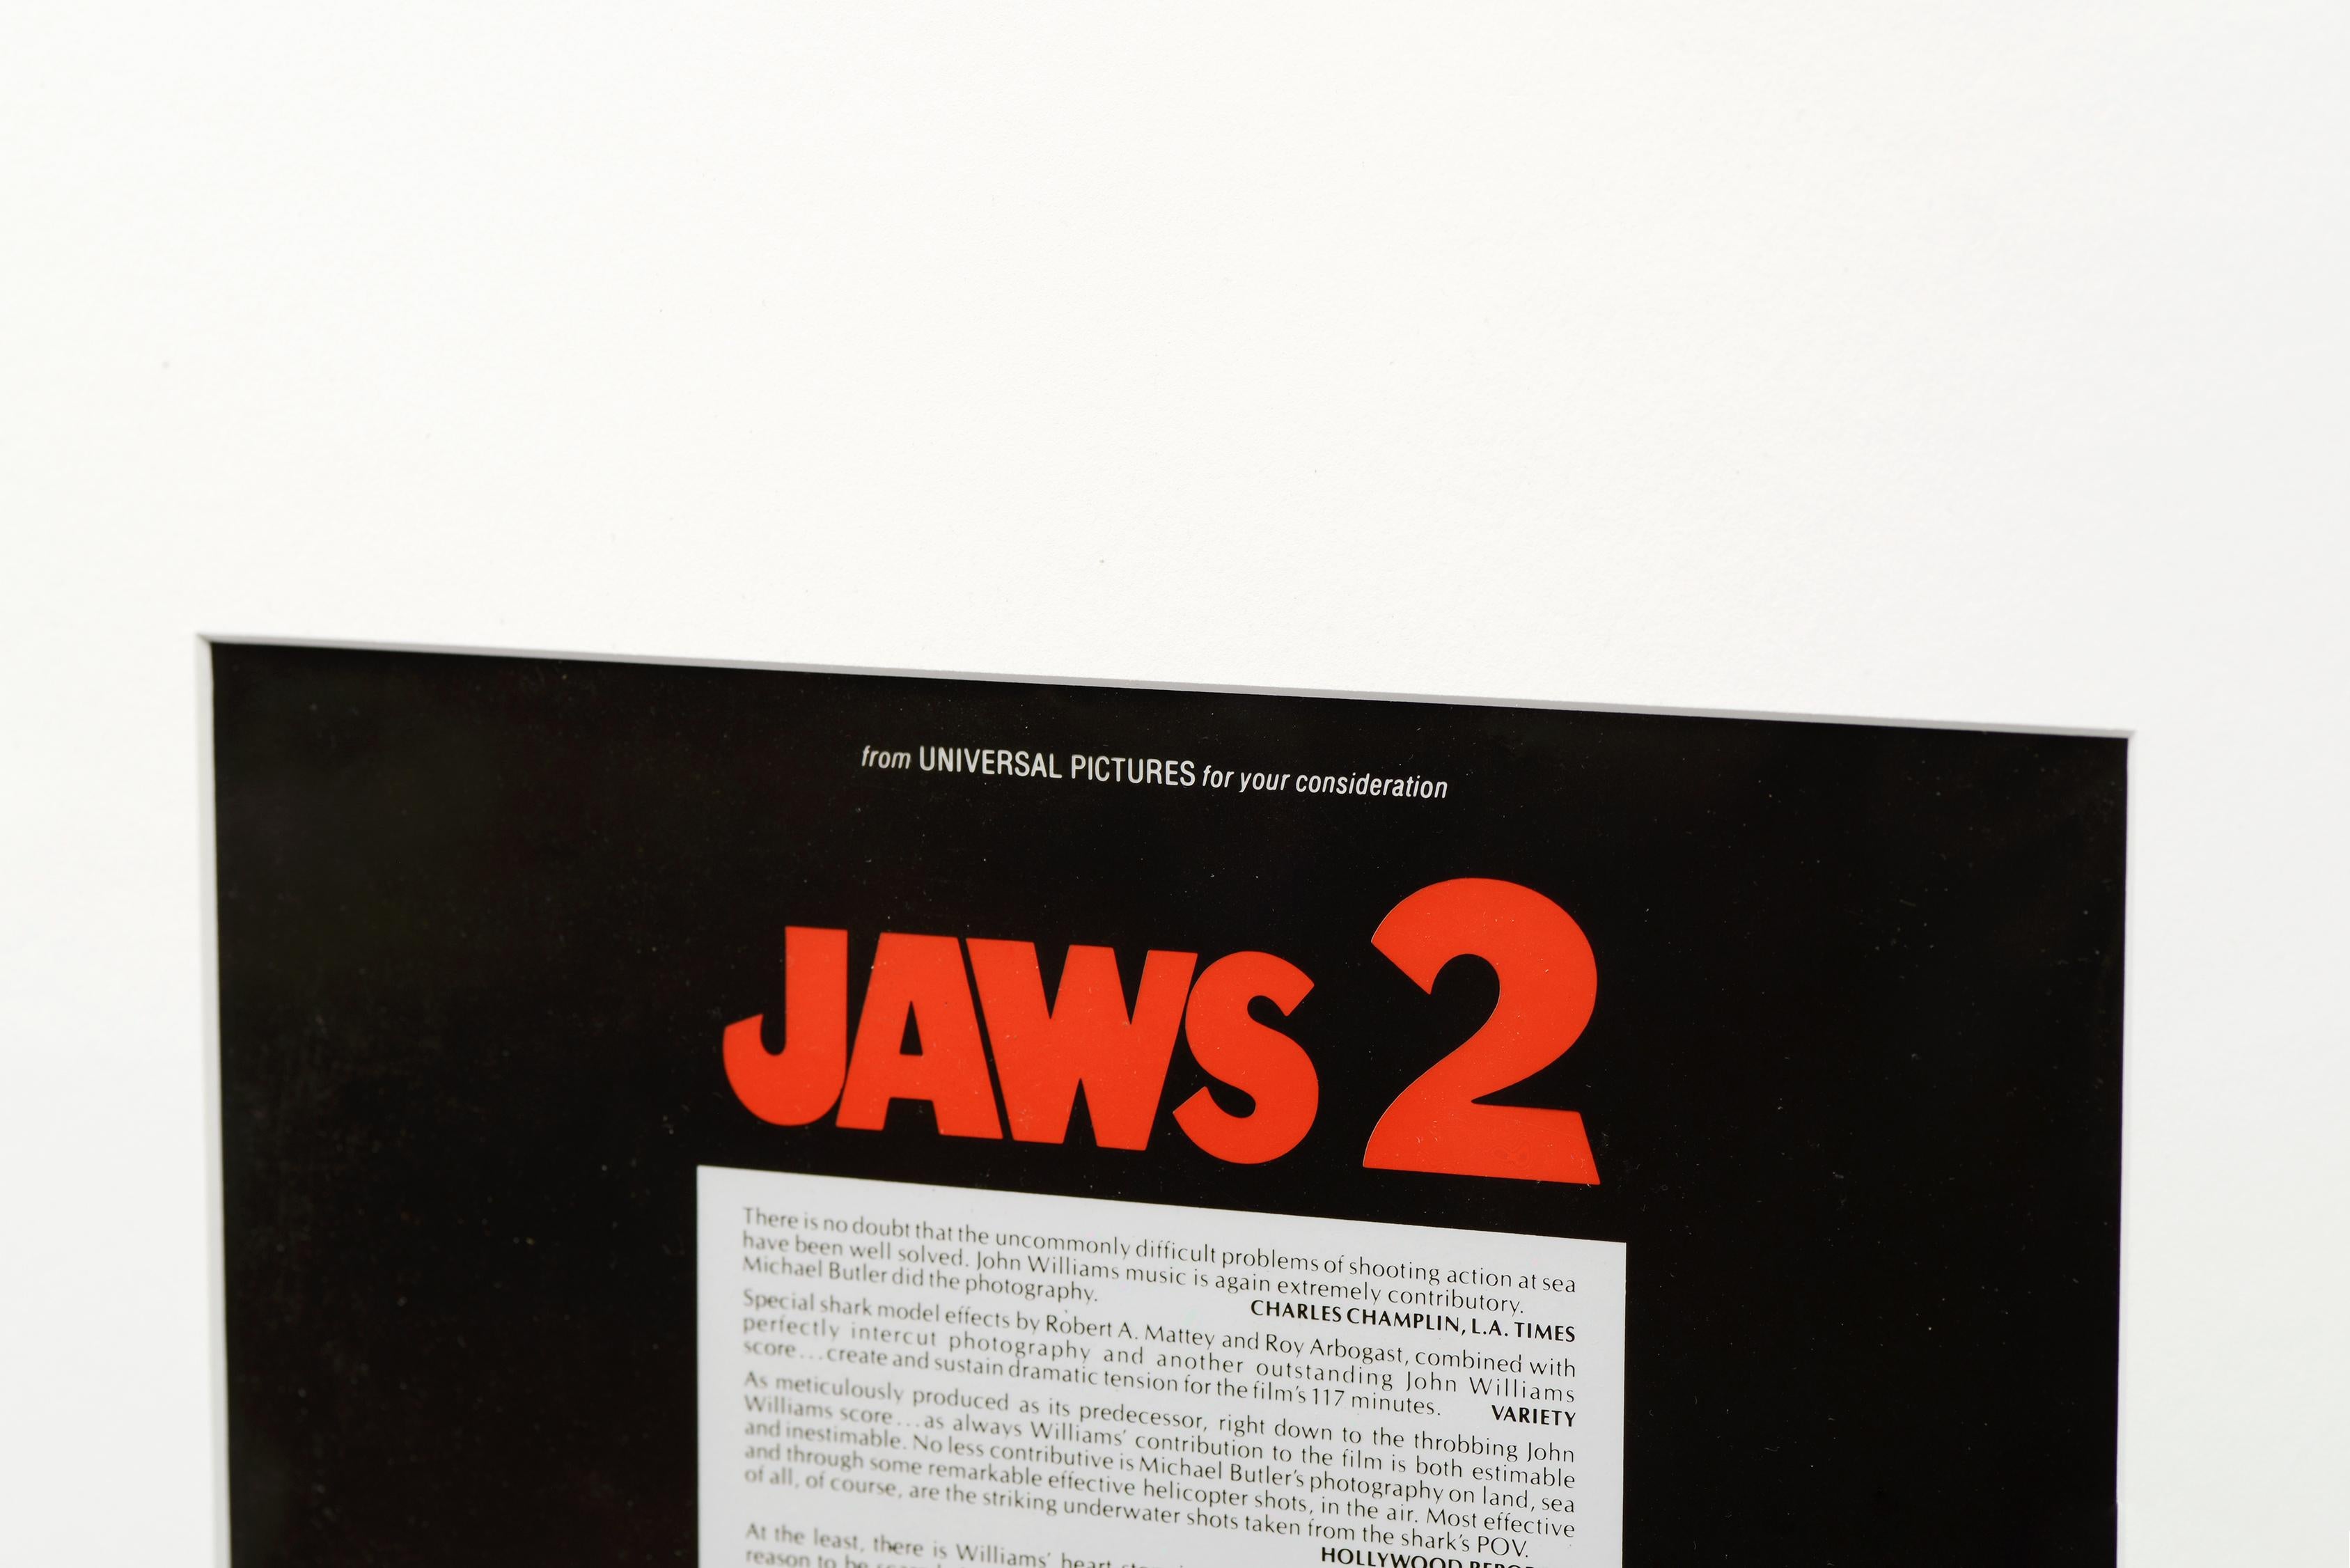 Authentic Hollywood memorabilia! Vintage movie advertisement art transparency for Jaws 2, 1978. Newly prepared with new custom acid-free overlay mat and protective plastic sleeve. Overall in excellent vintage condition with very gentle surface wear.